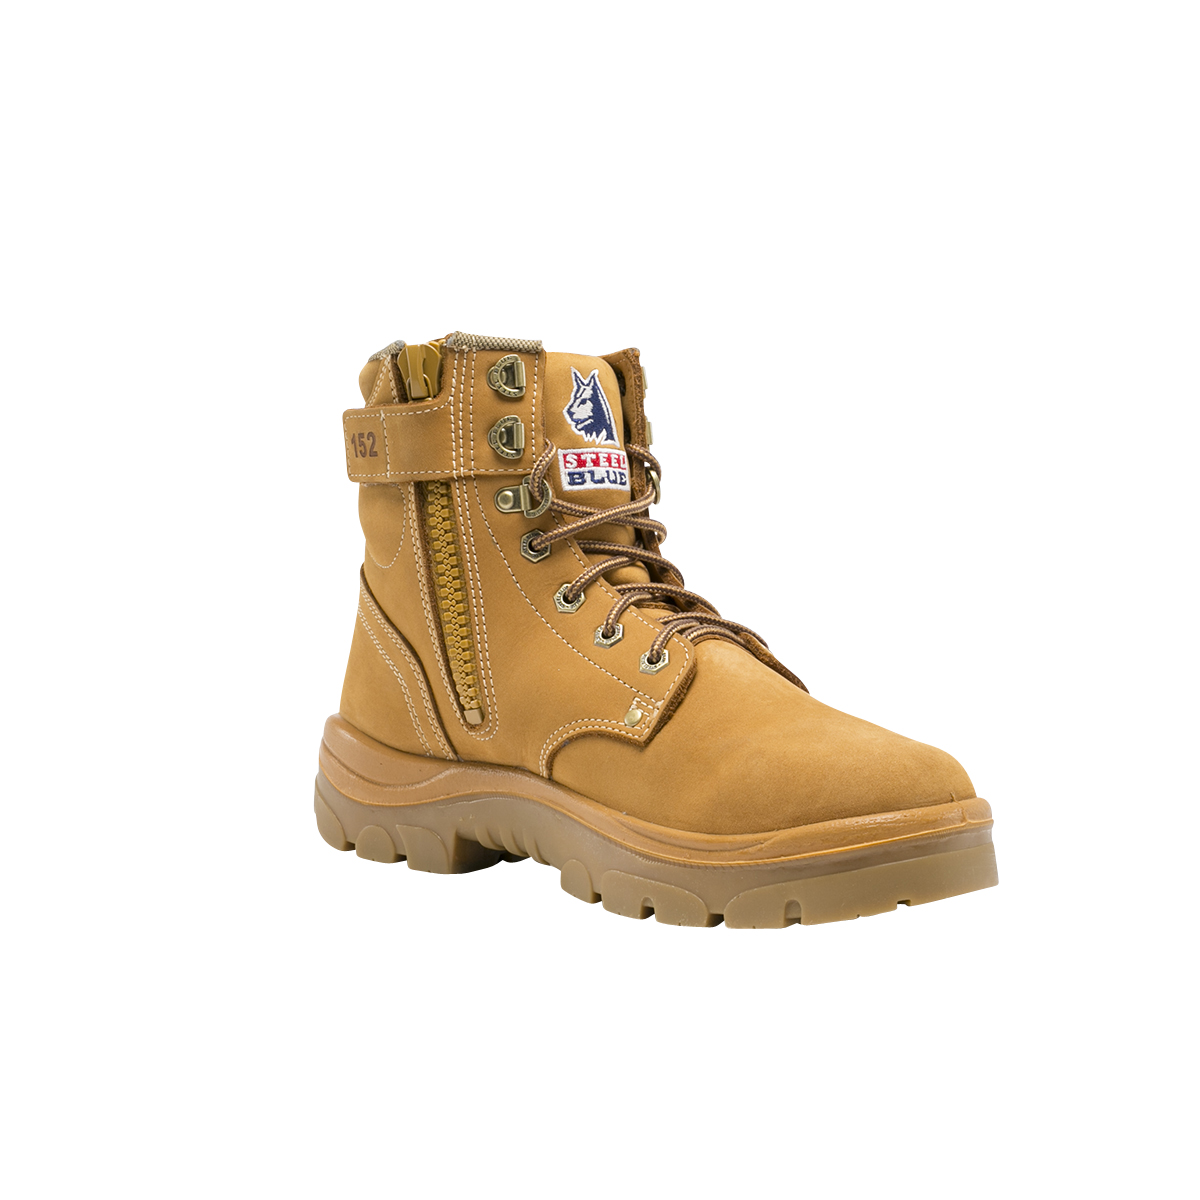 SAFETY BOOT ARGYLE NITRILE ZIP S10 -ANKLE HEIGHT LACE WHEAT